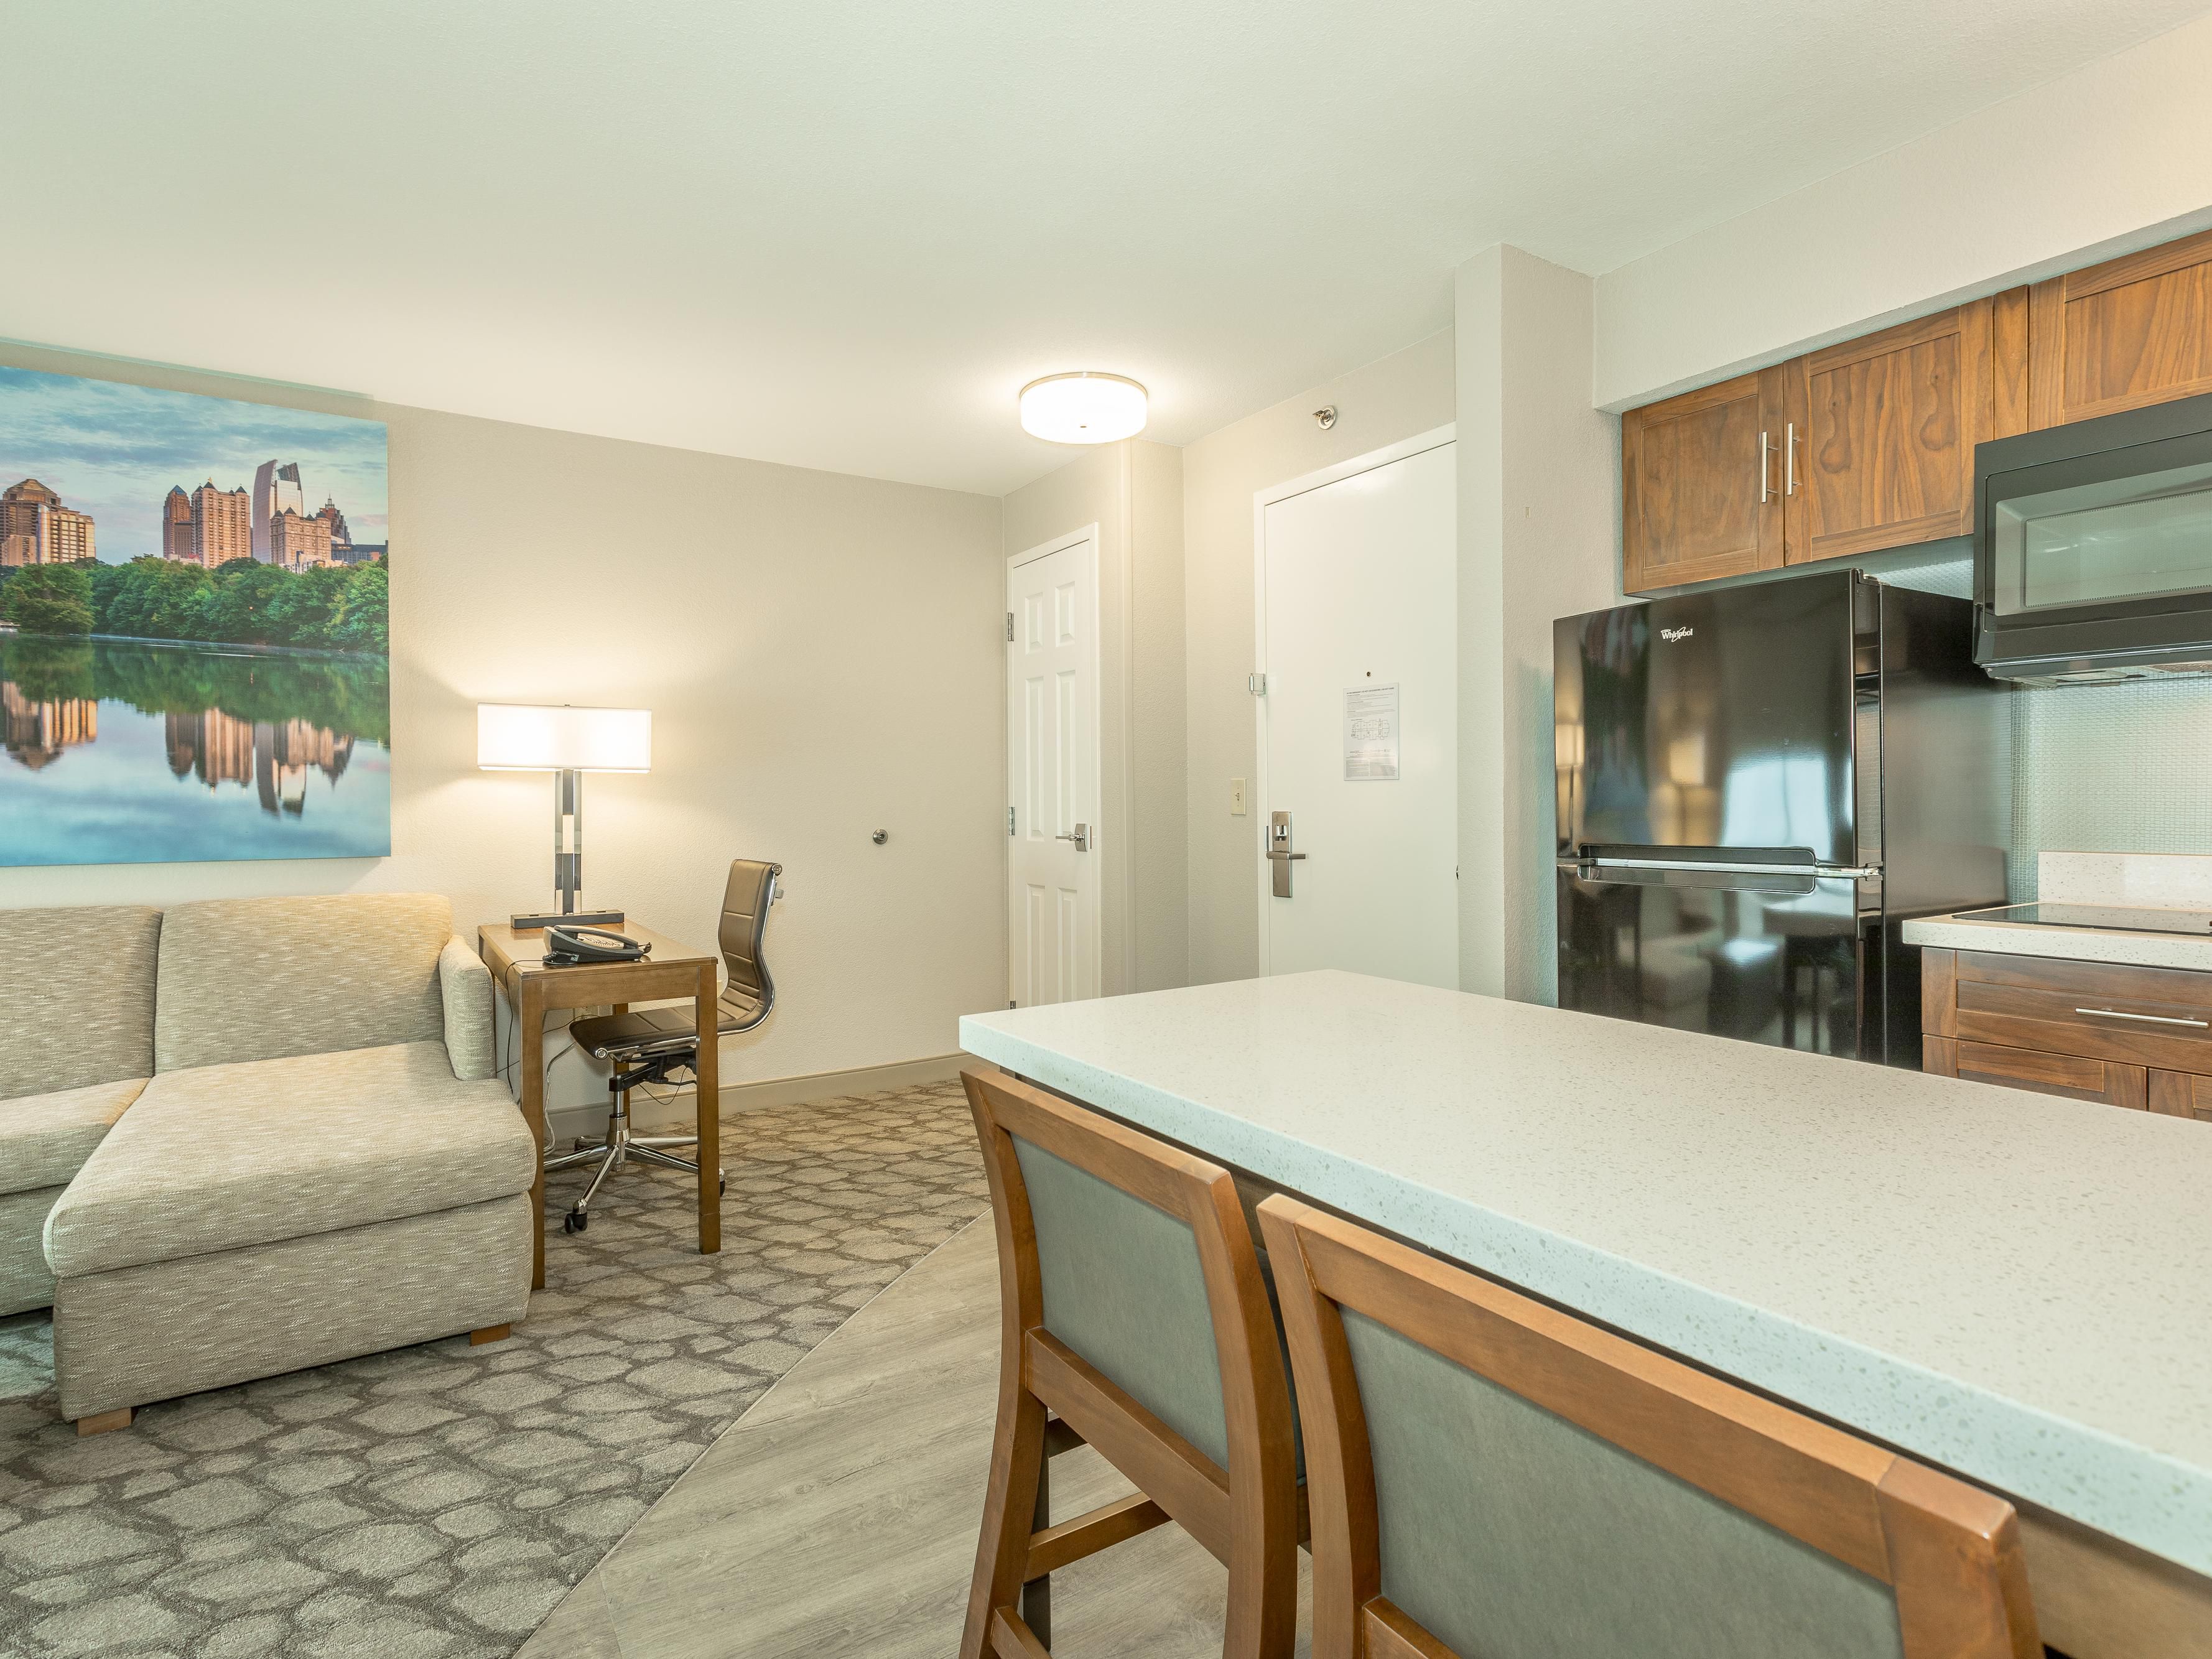 Our Two Room Suites are fully stocked with amenities for every day living and perfect for a mini get a away or convenient alternative for extended stay or apartment living. Includes living room lounge area with television and separate sleeping quarters. 